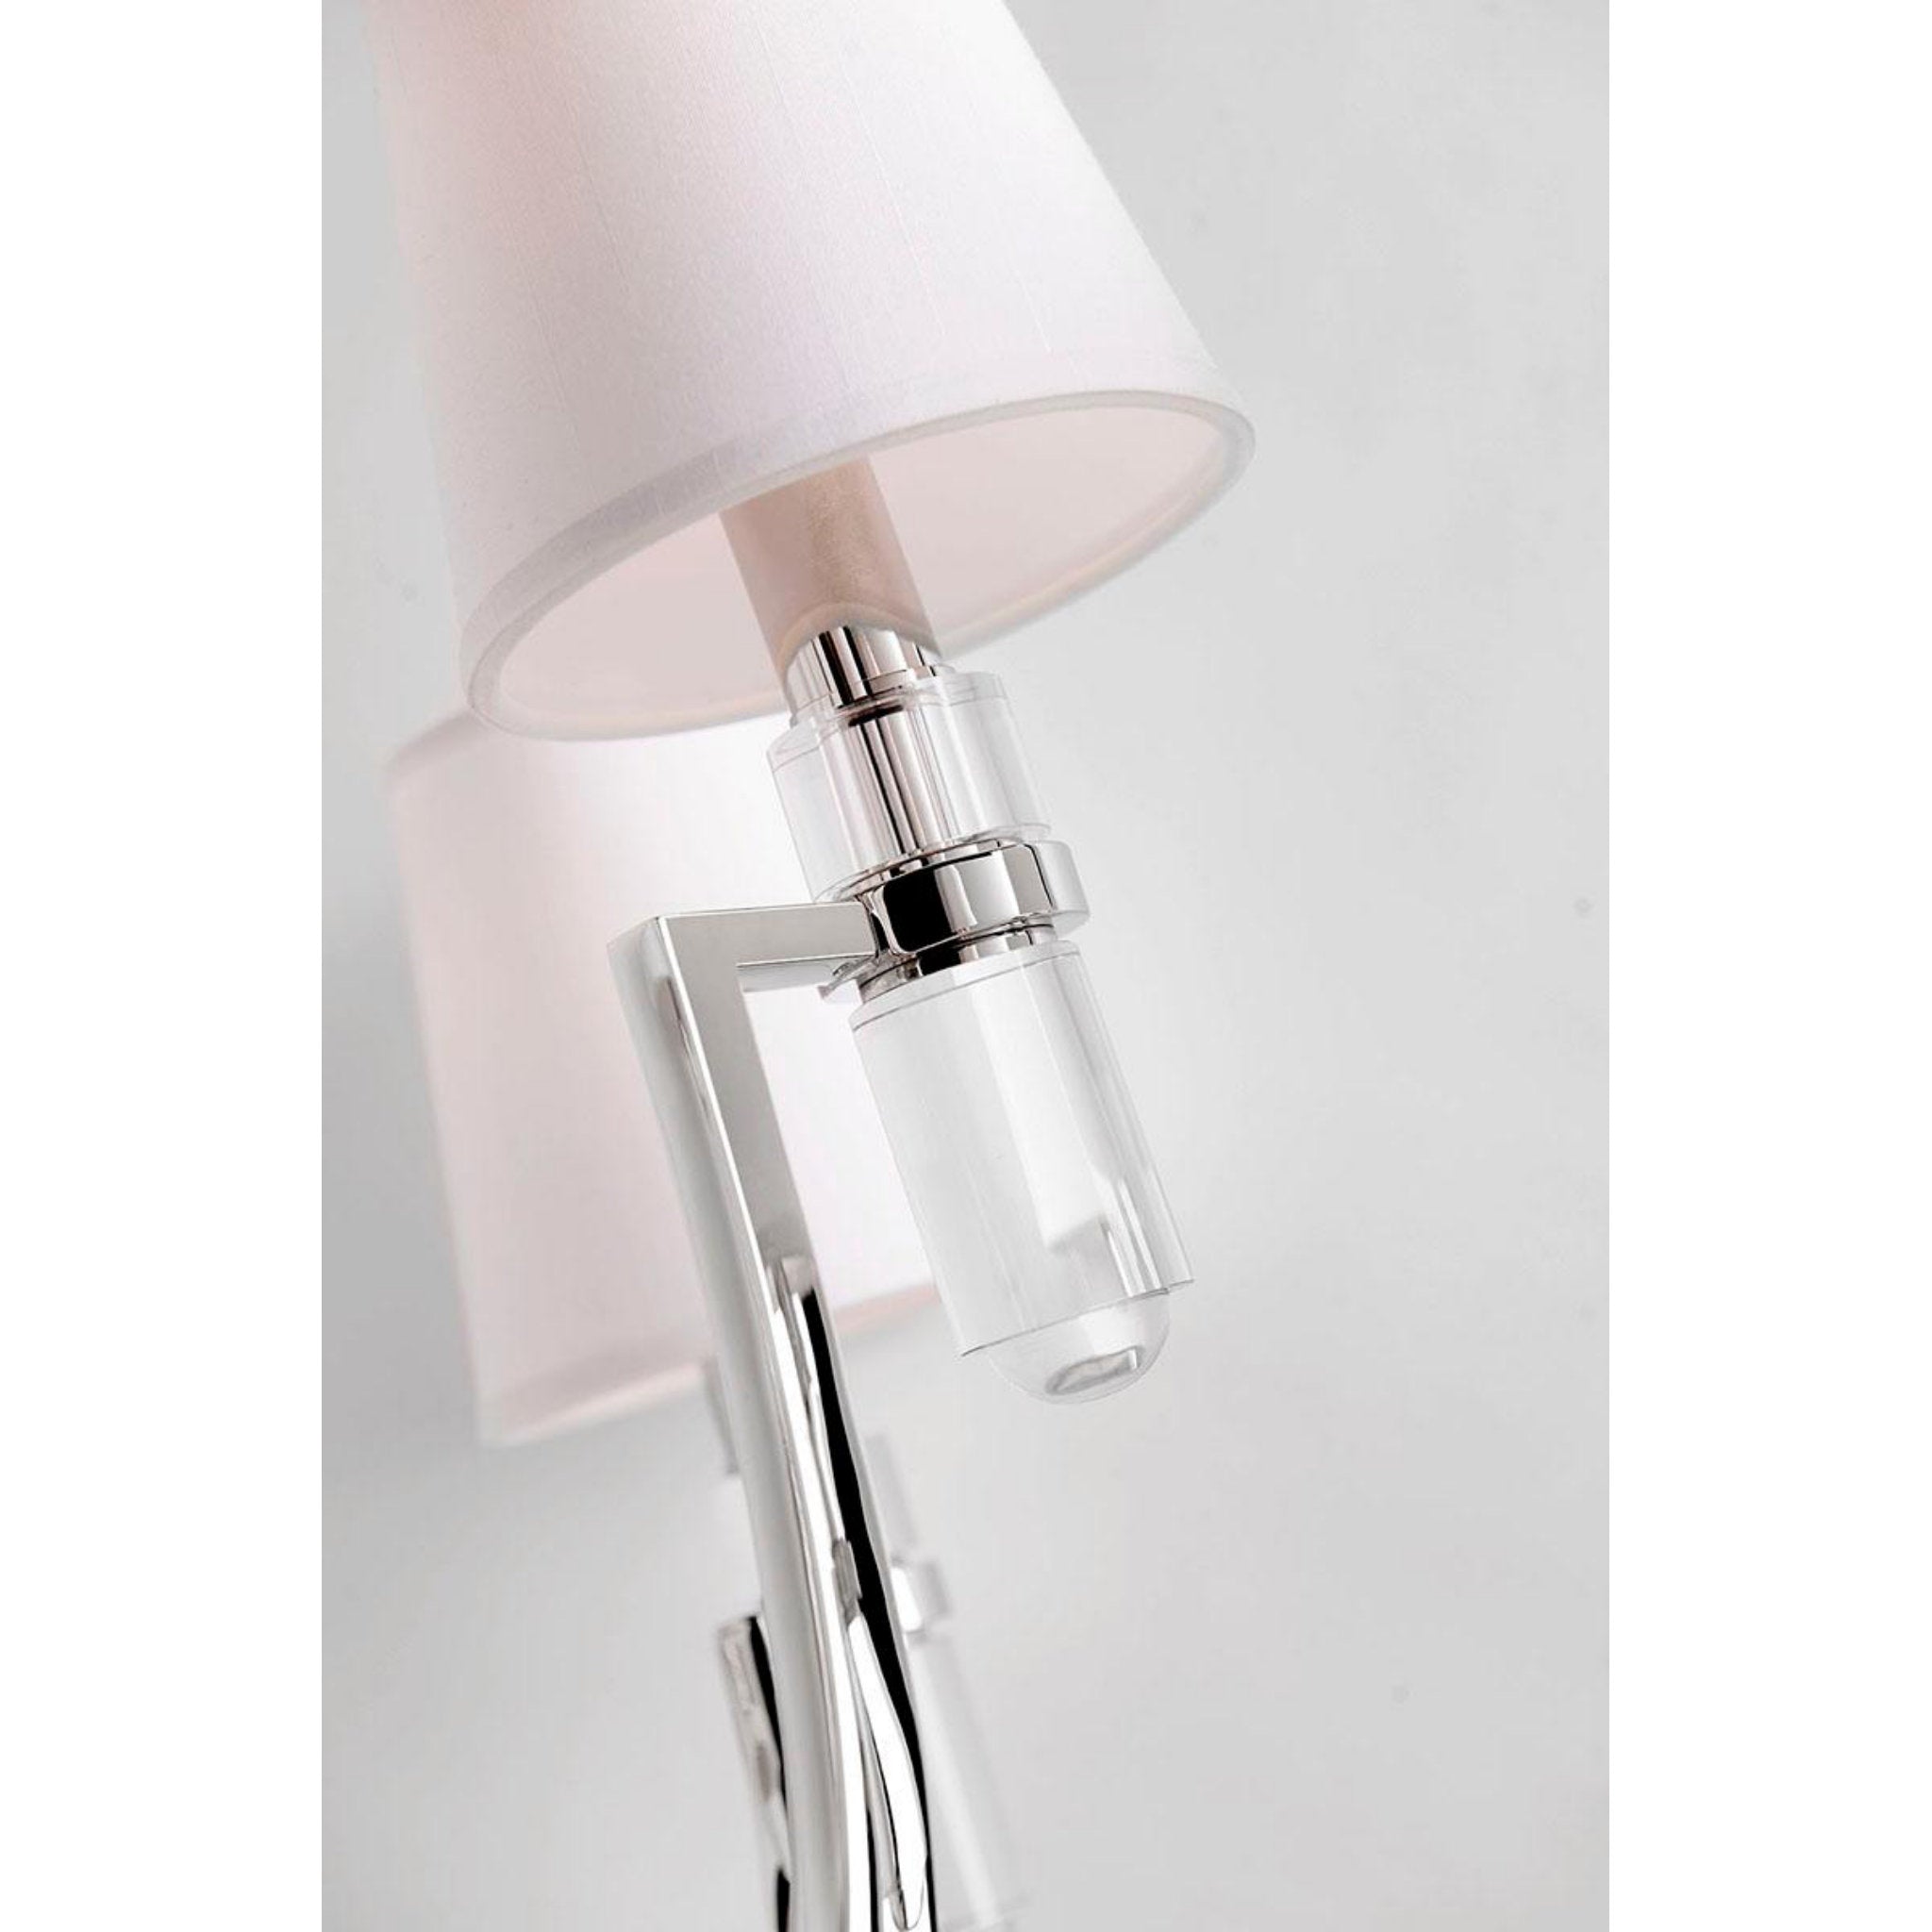 Dayton 1 Light Wall Sconce in Polished Nickel